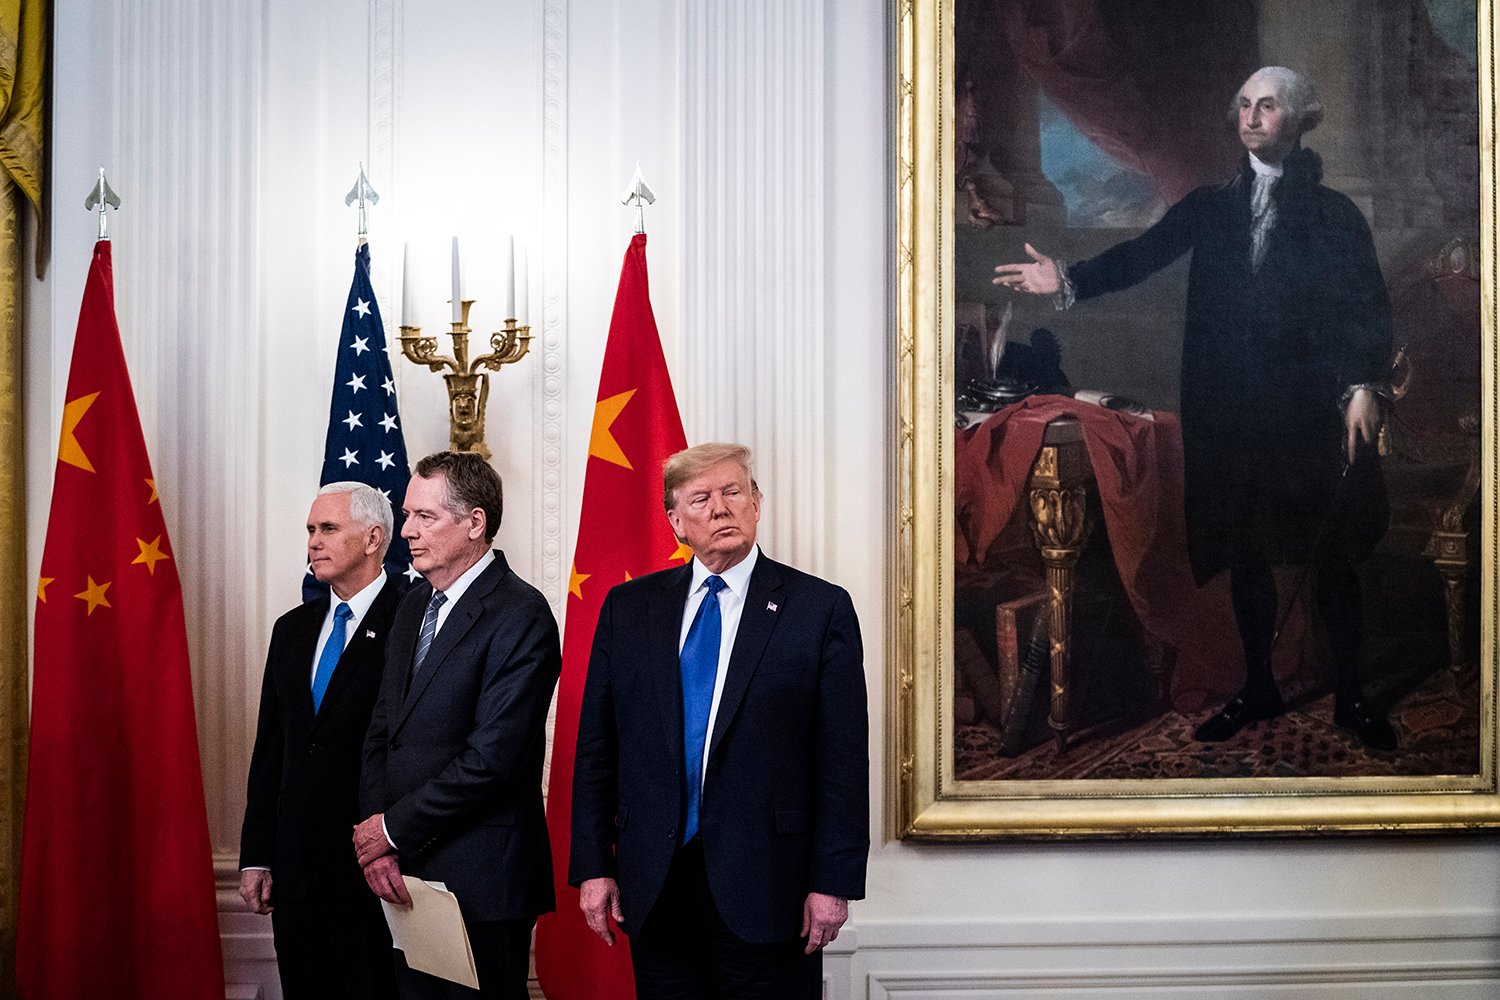 Three men in suits and ties stand in front of two Chinese and one U.S. flag. Behind them is an ornate wall and larger portrait of George Washington.